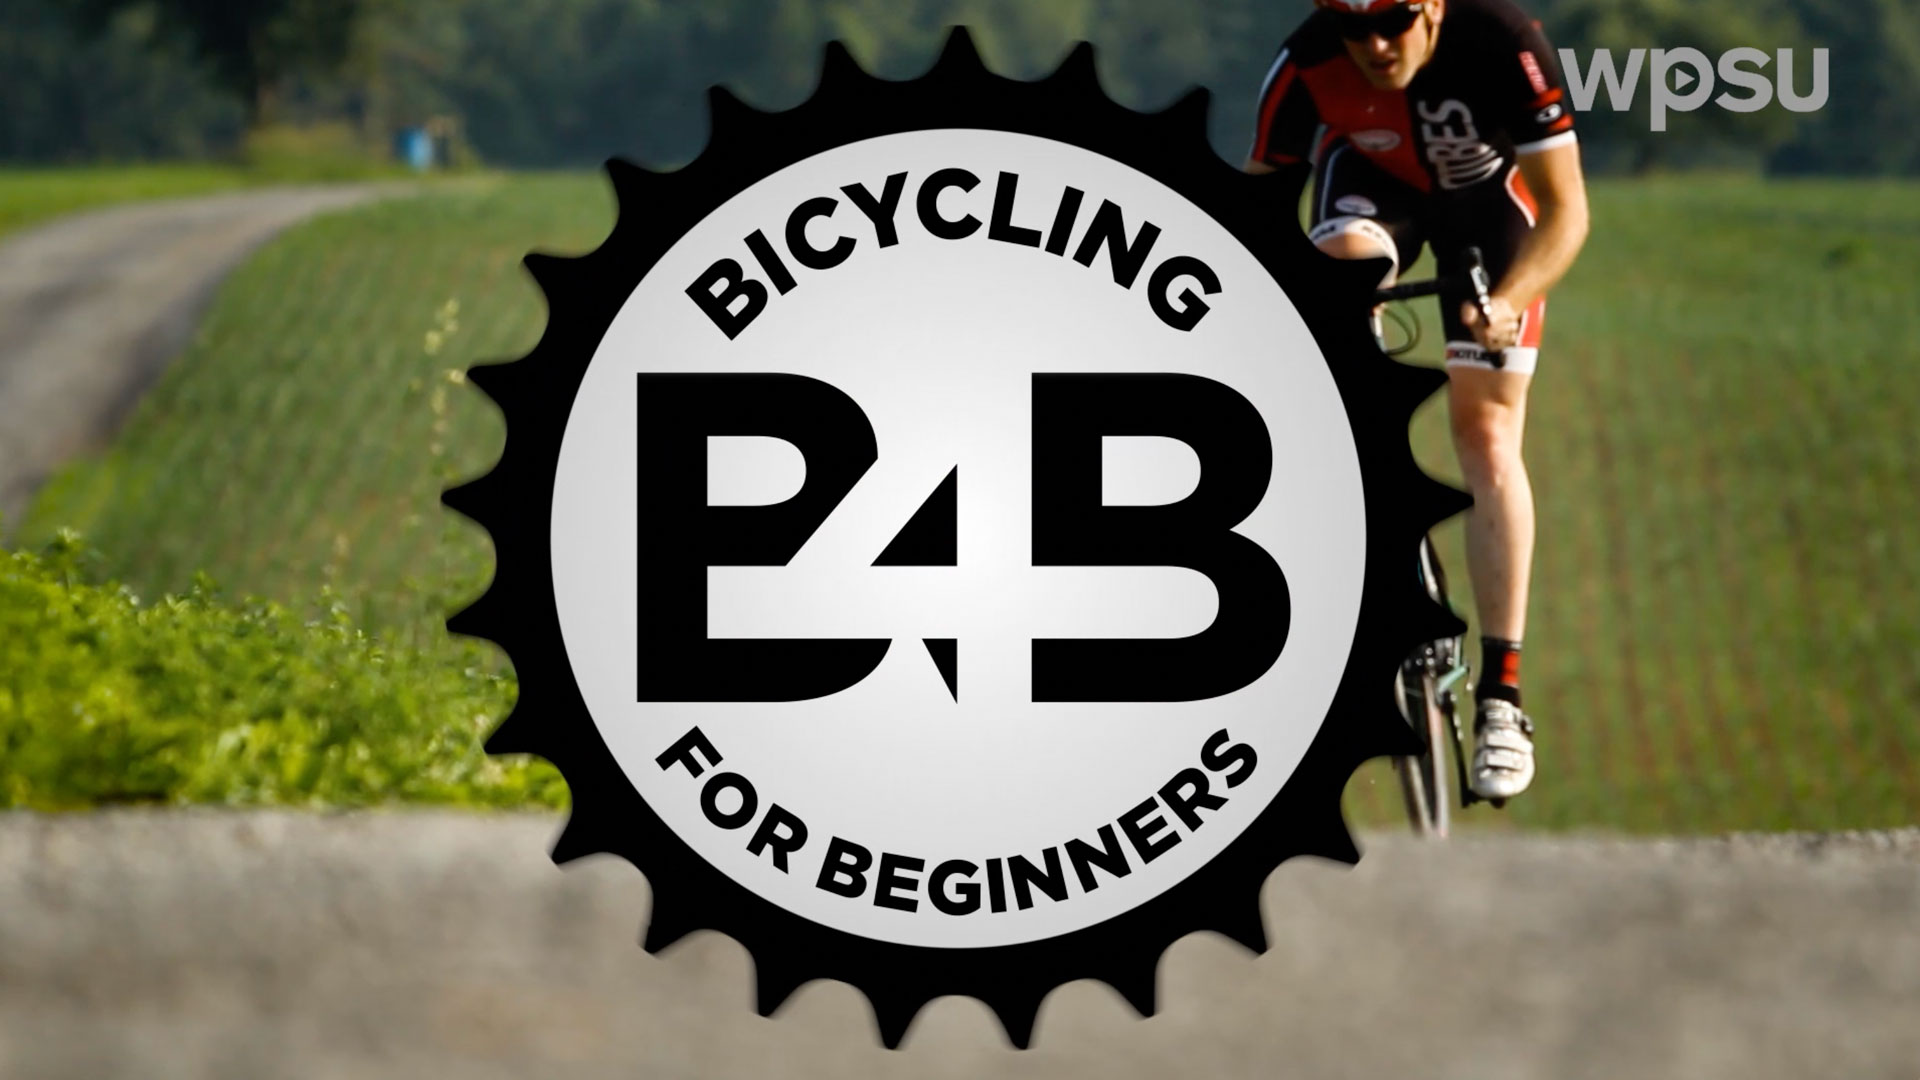 bicycling for beginners logo